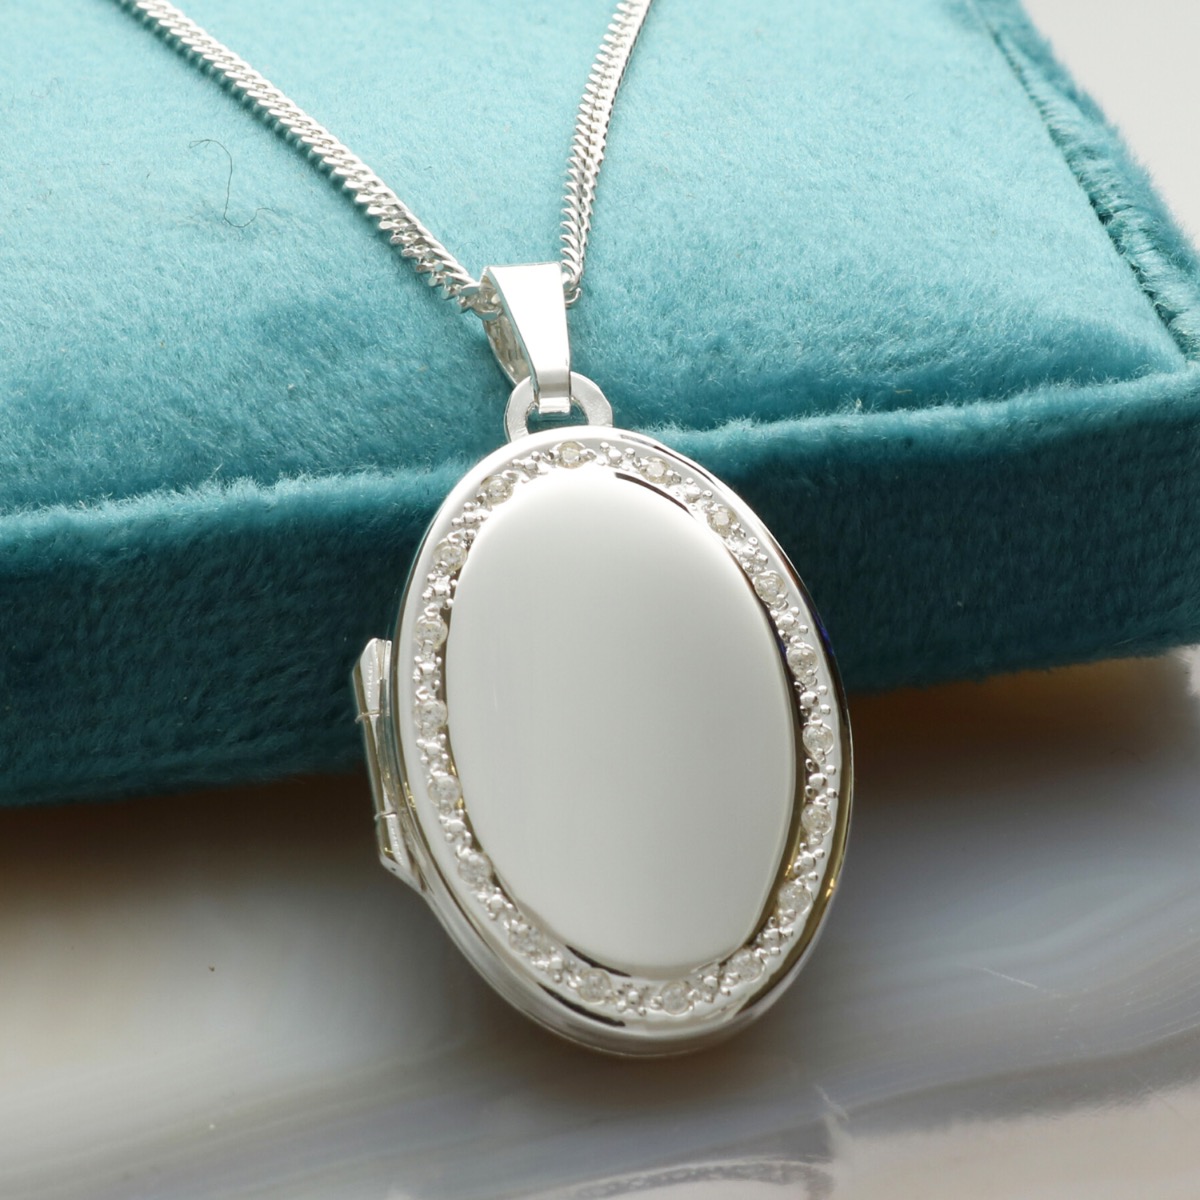 Sterling Silver Oval Locket Set With CZ Crystals, Optional Engraving & Chain